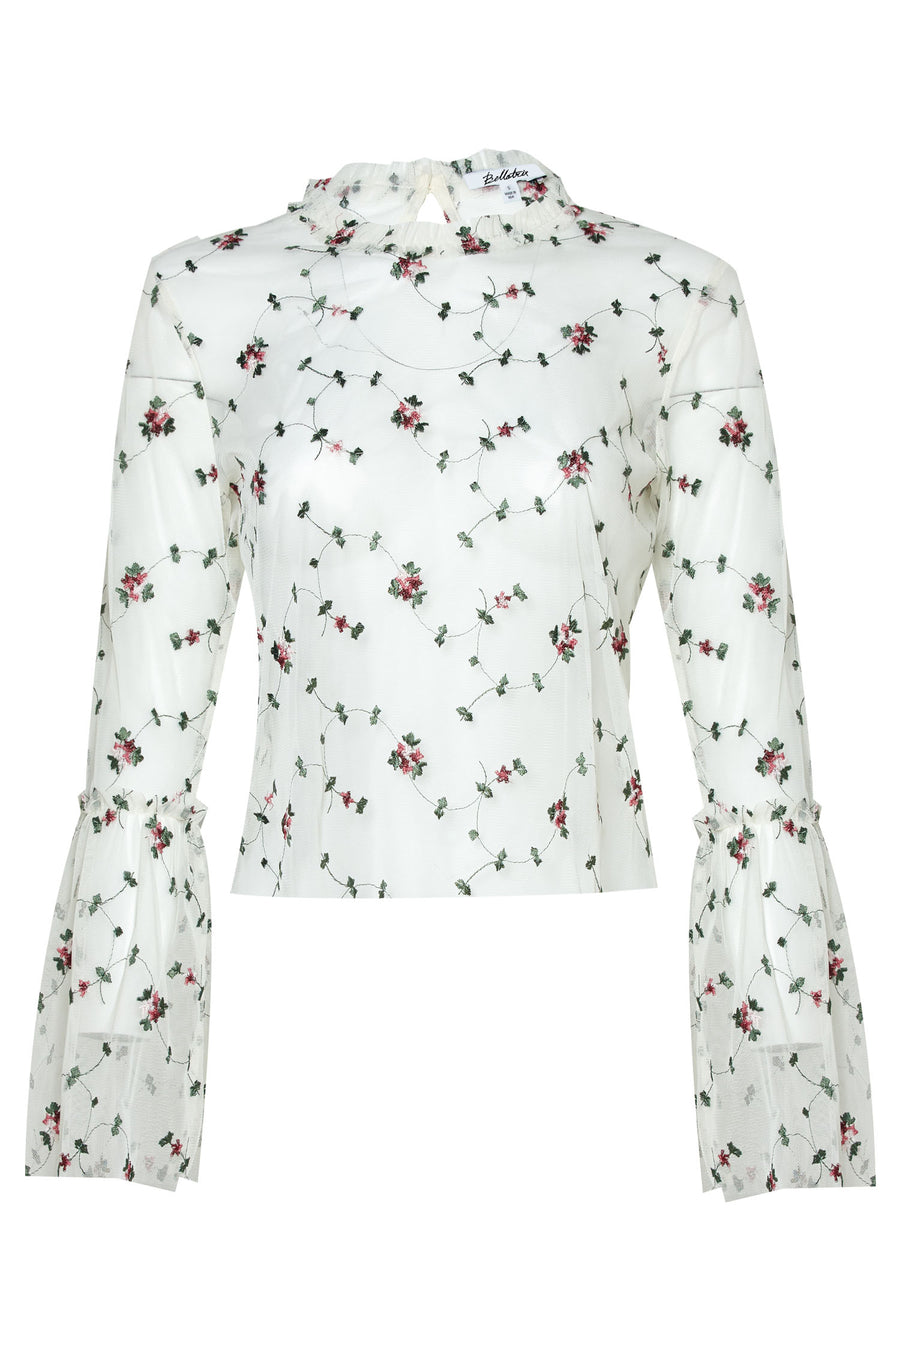 Sheer Blouse With Floral Embroidery in Ivory - shopatkonus